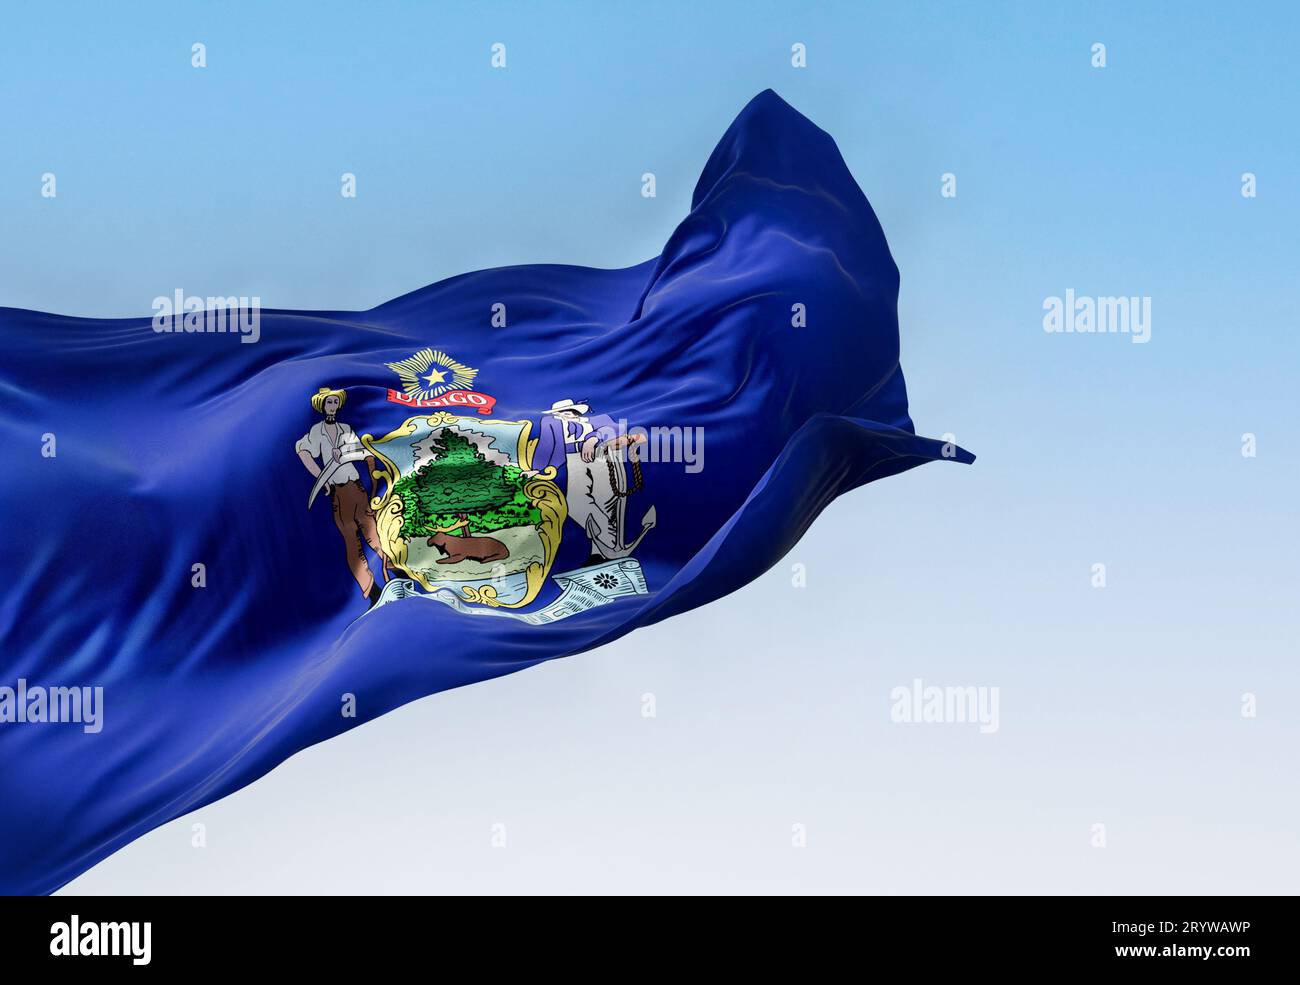 Maine state flag waving in the wind on a clear day. State coat of arms centered on a dark blue field. 3d illustration render. Rippled fabric Stock Photo